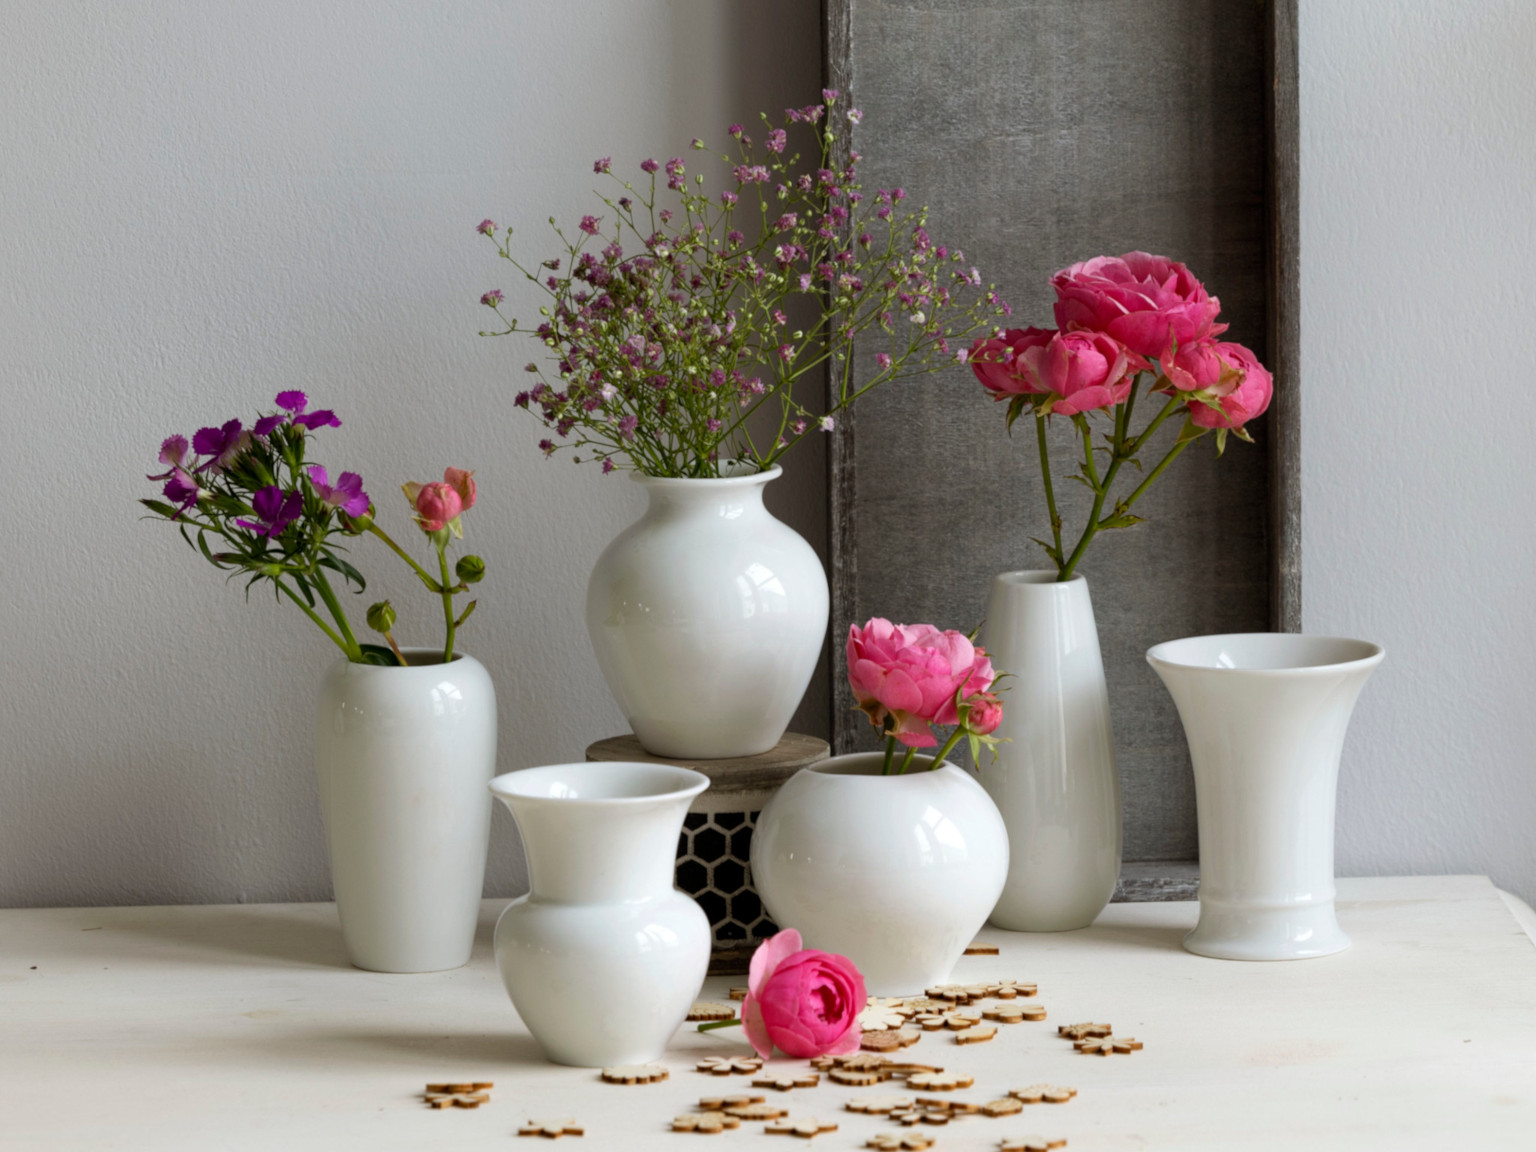 Six small white porcelain vases decorated with purple flowers from Hutschenreuther Flower Minis